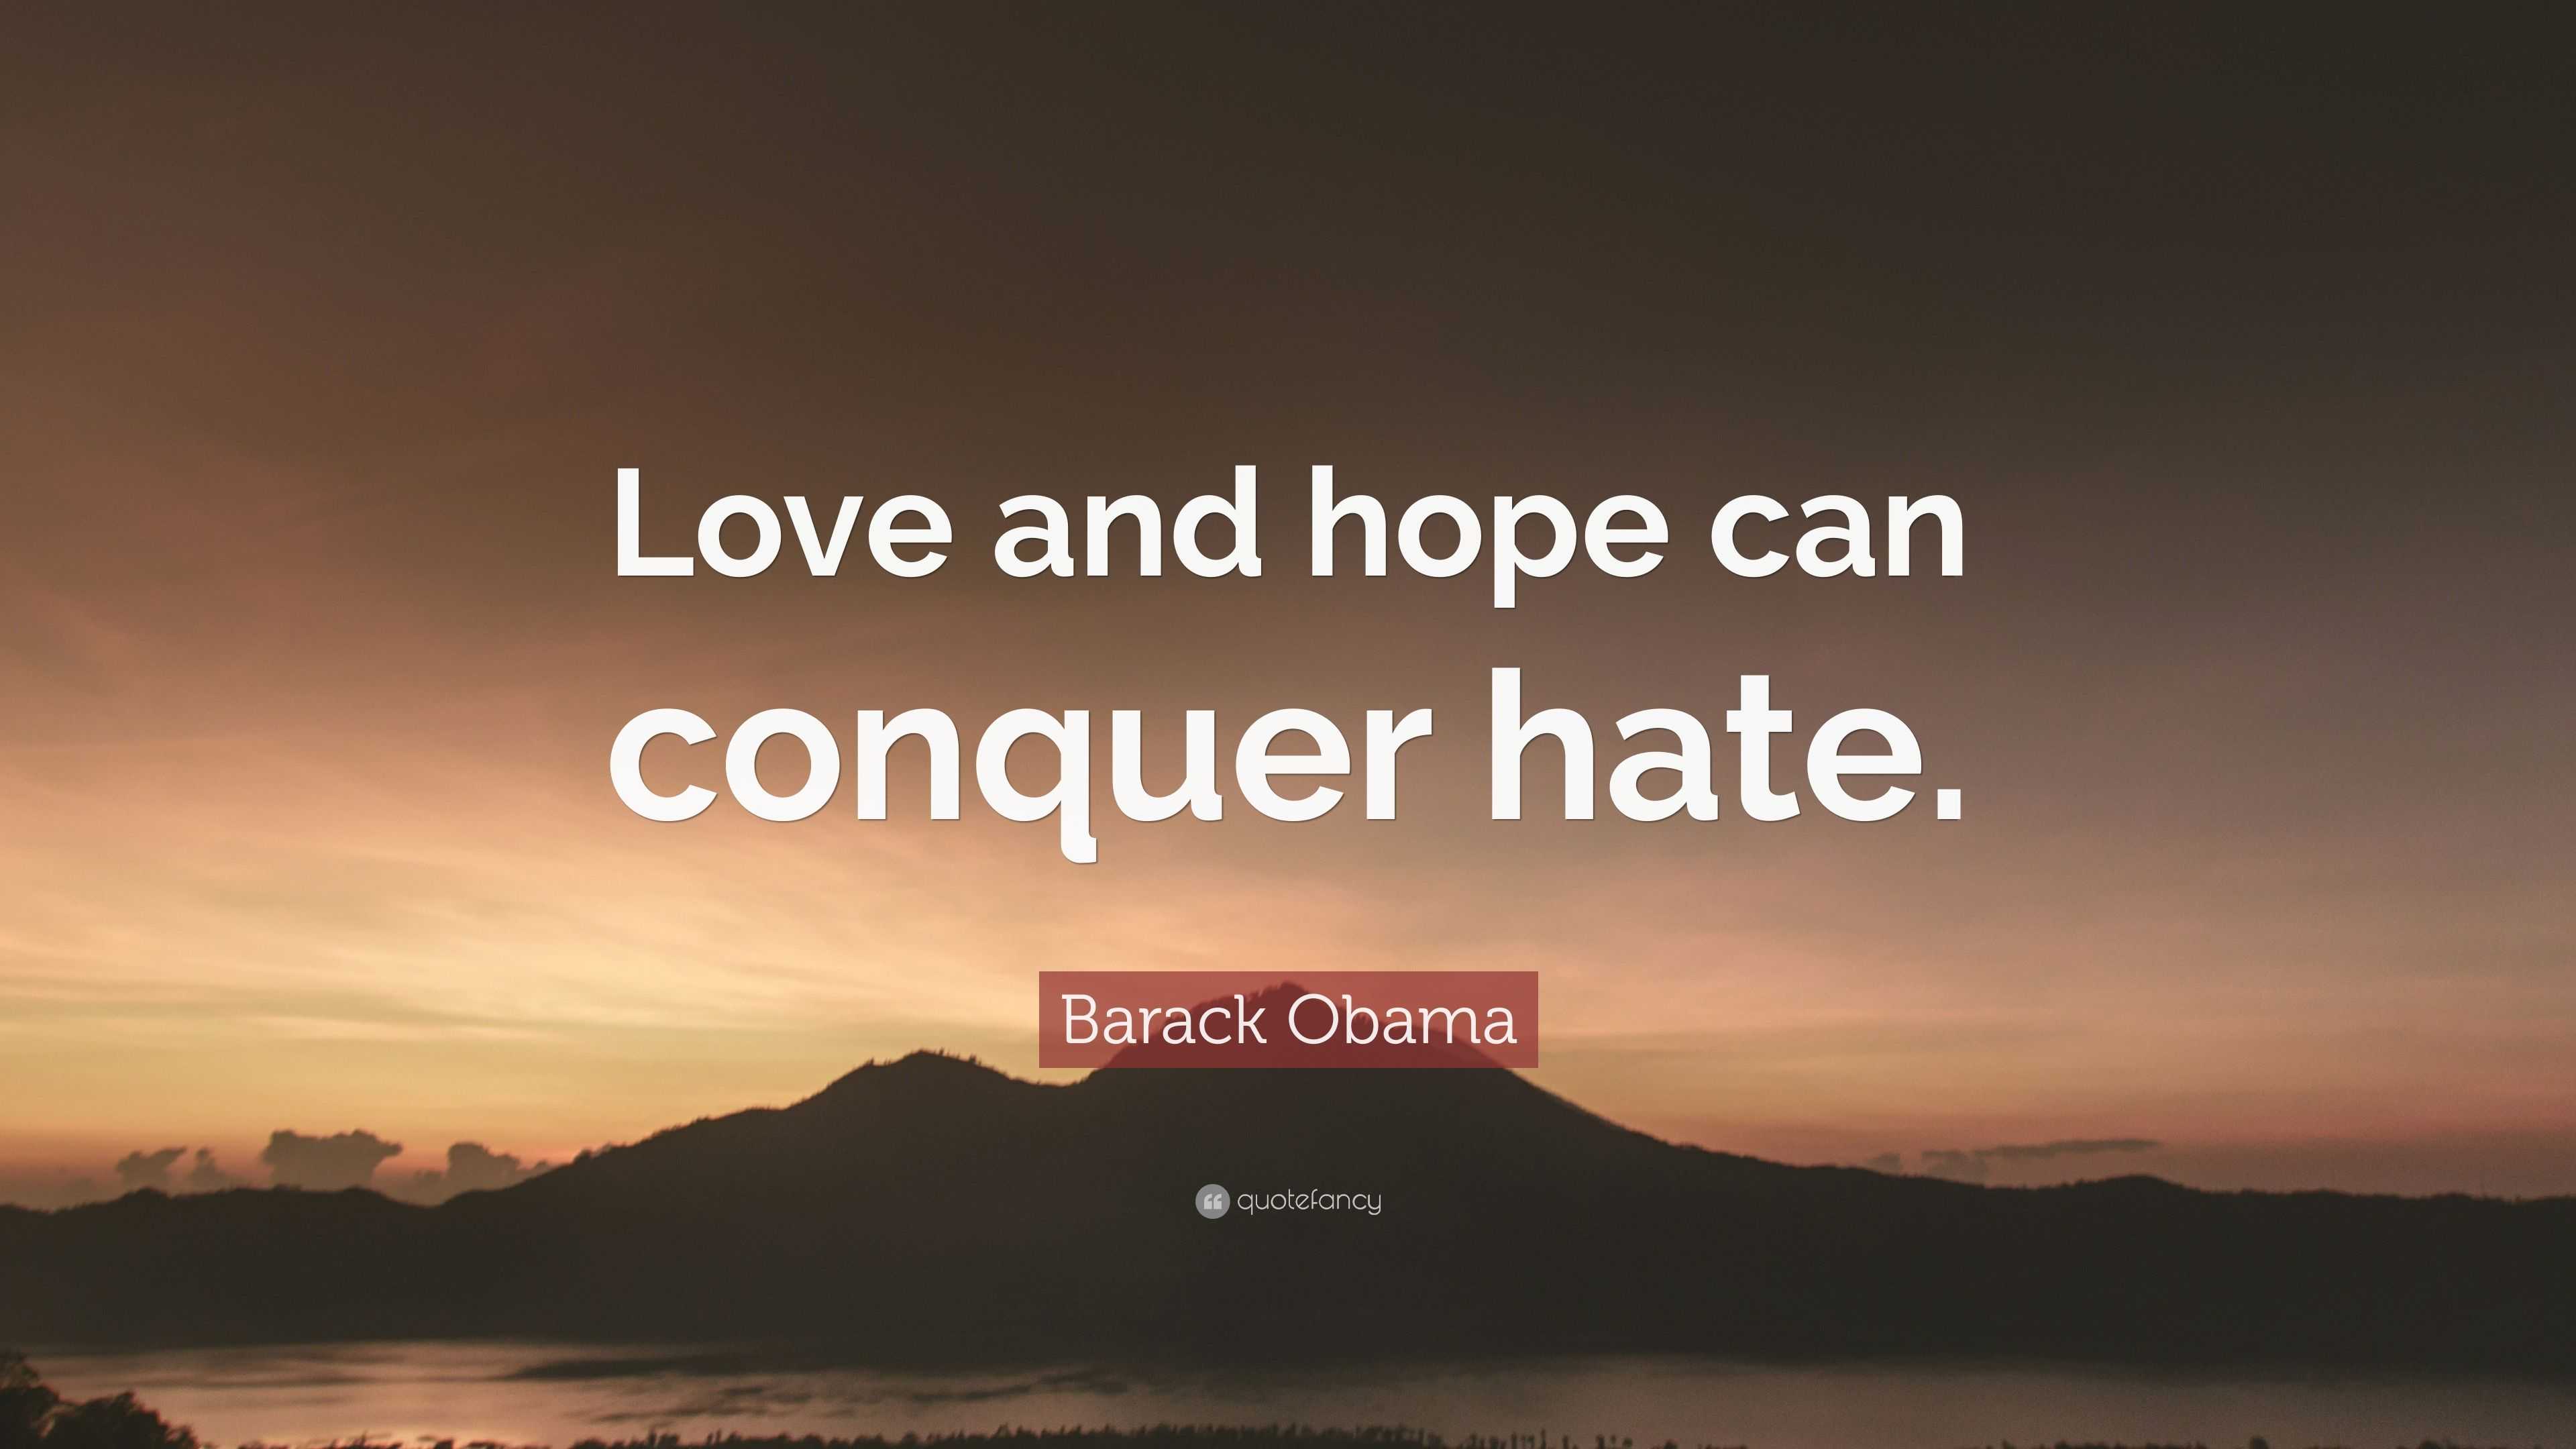 Barack Obama Quote “Love and hope can conquer hate ”